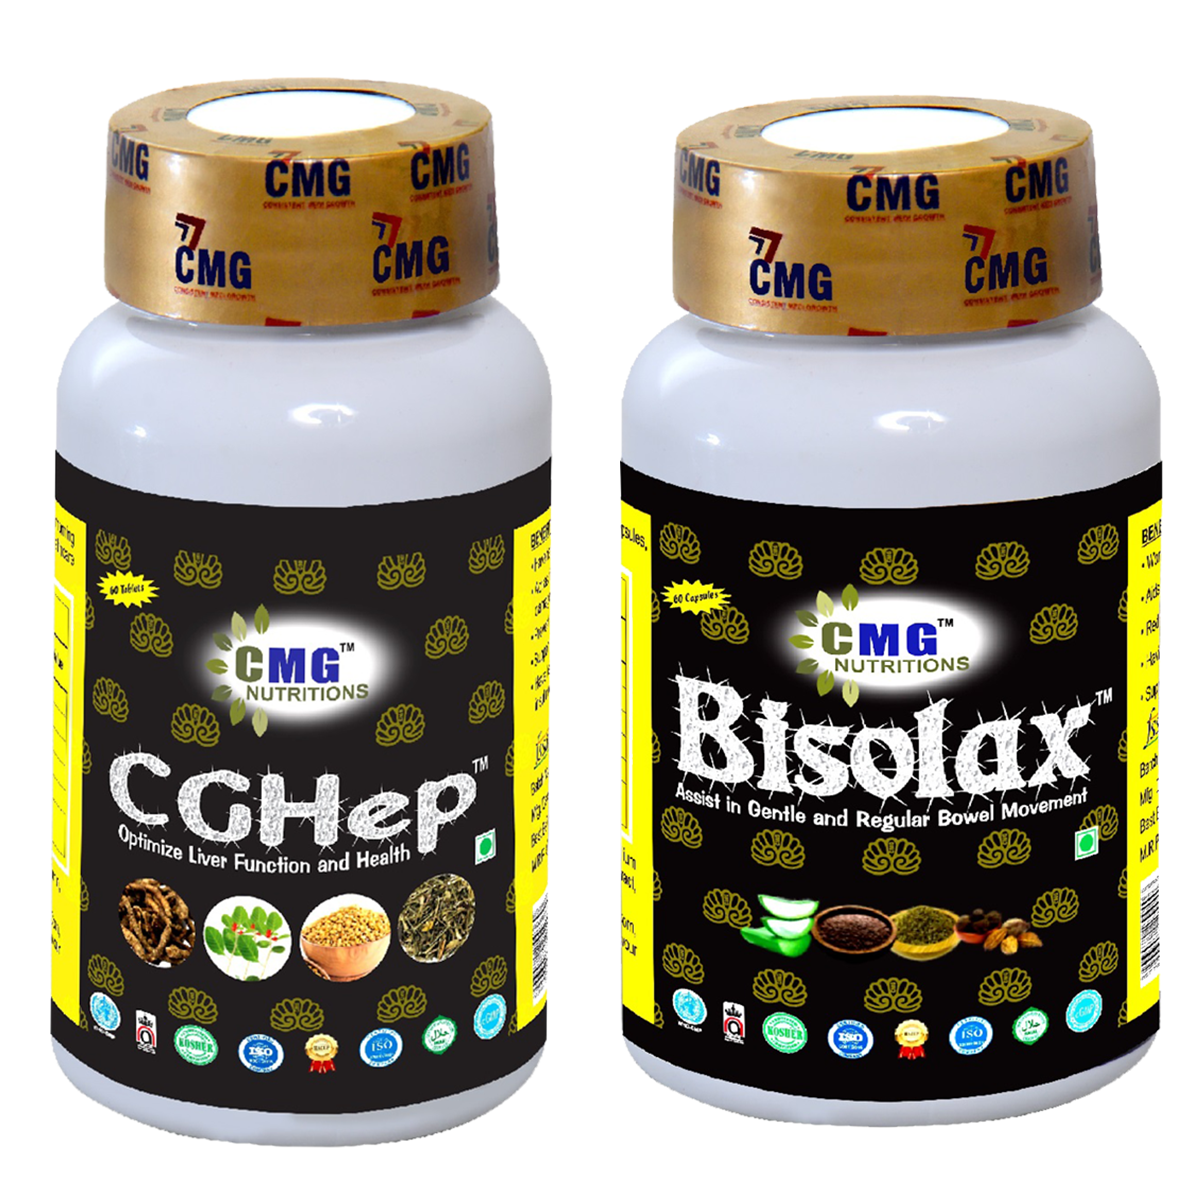 Constipation & Detox Combo Pack - Bisolax, CGHEP